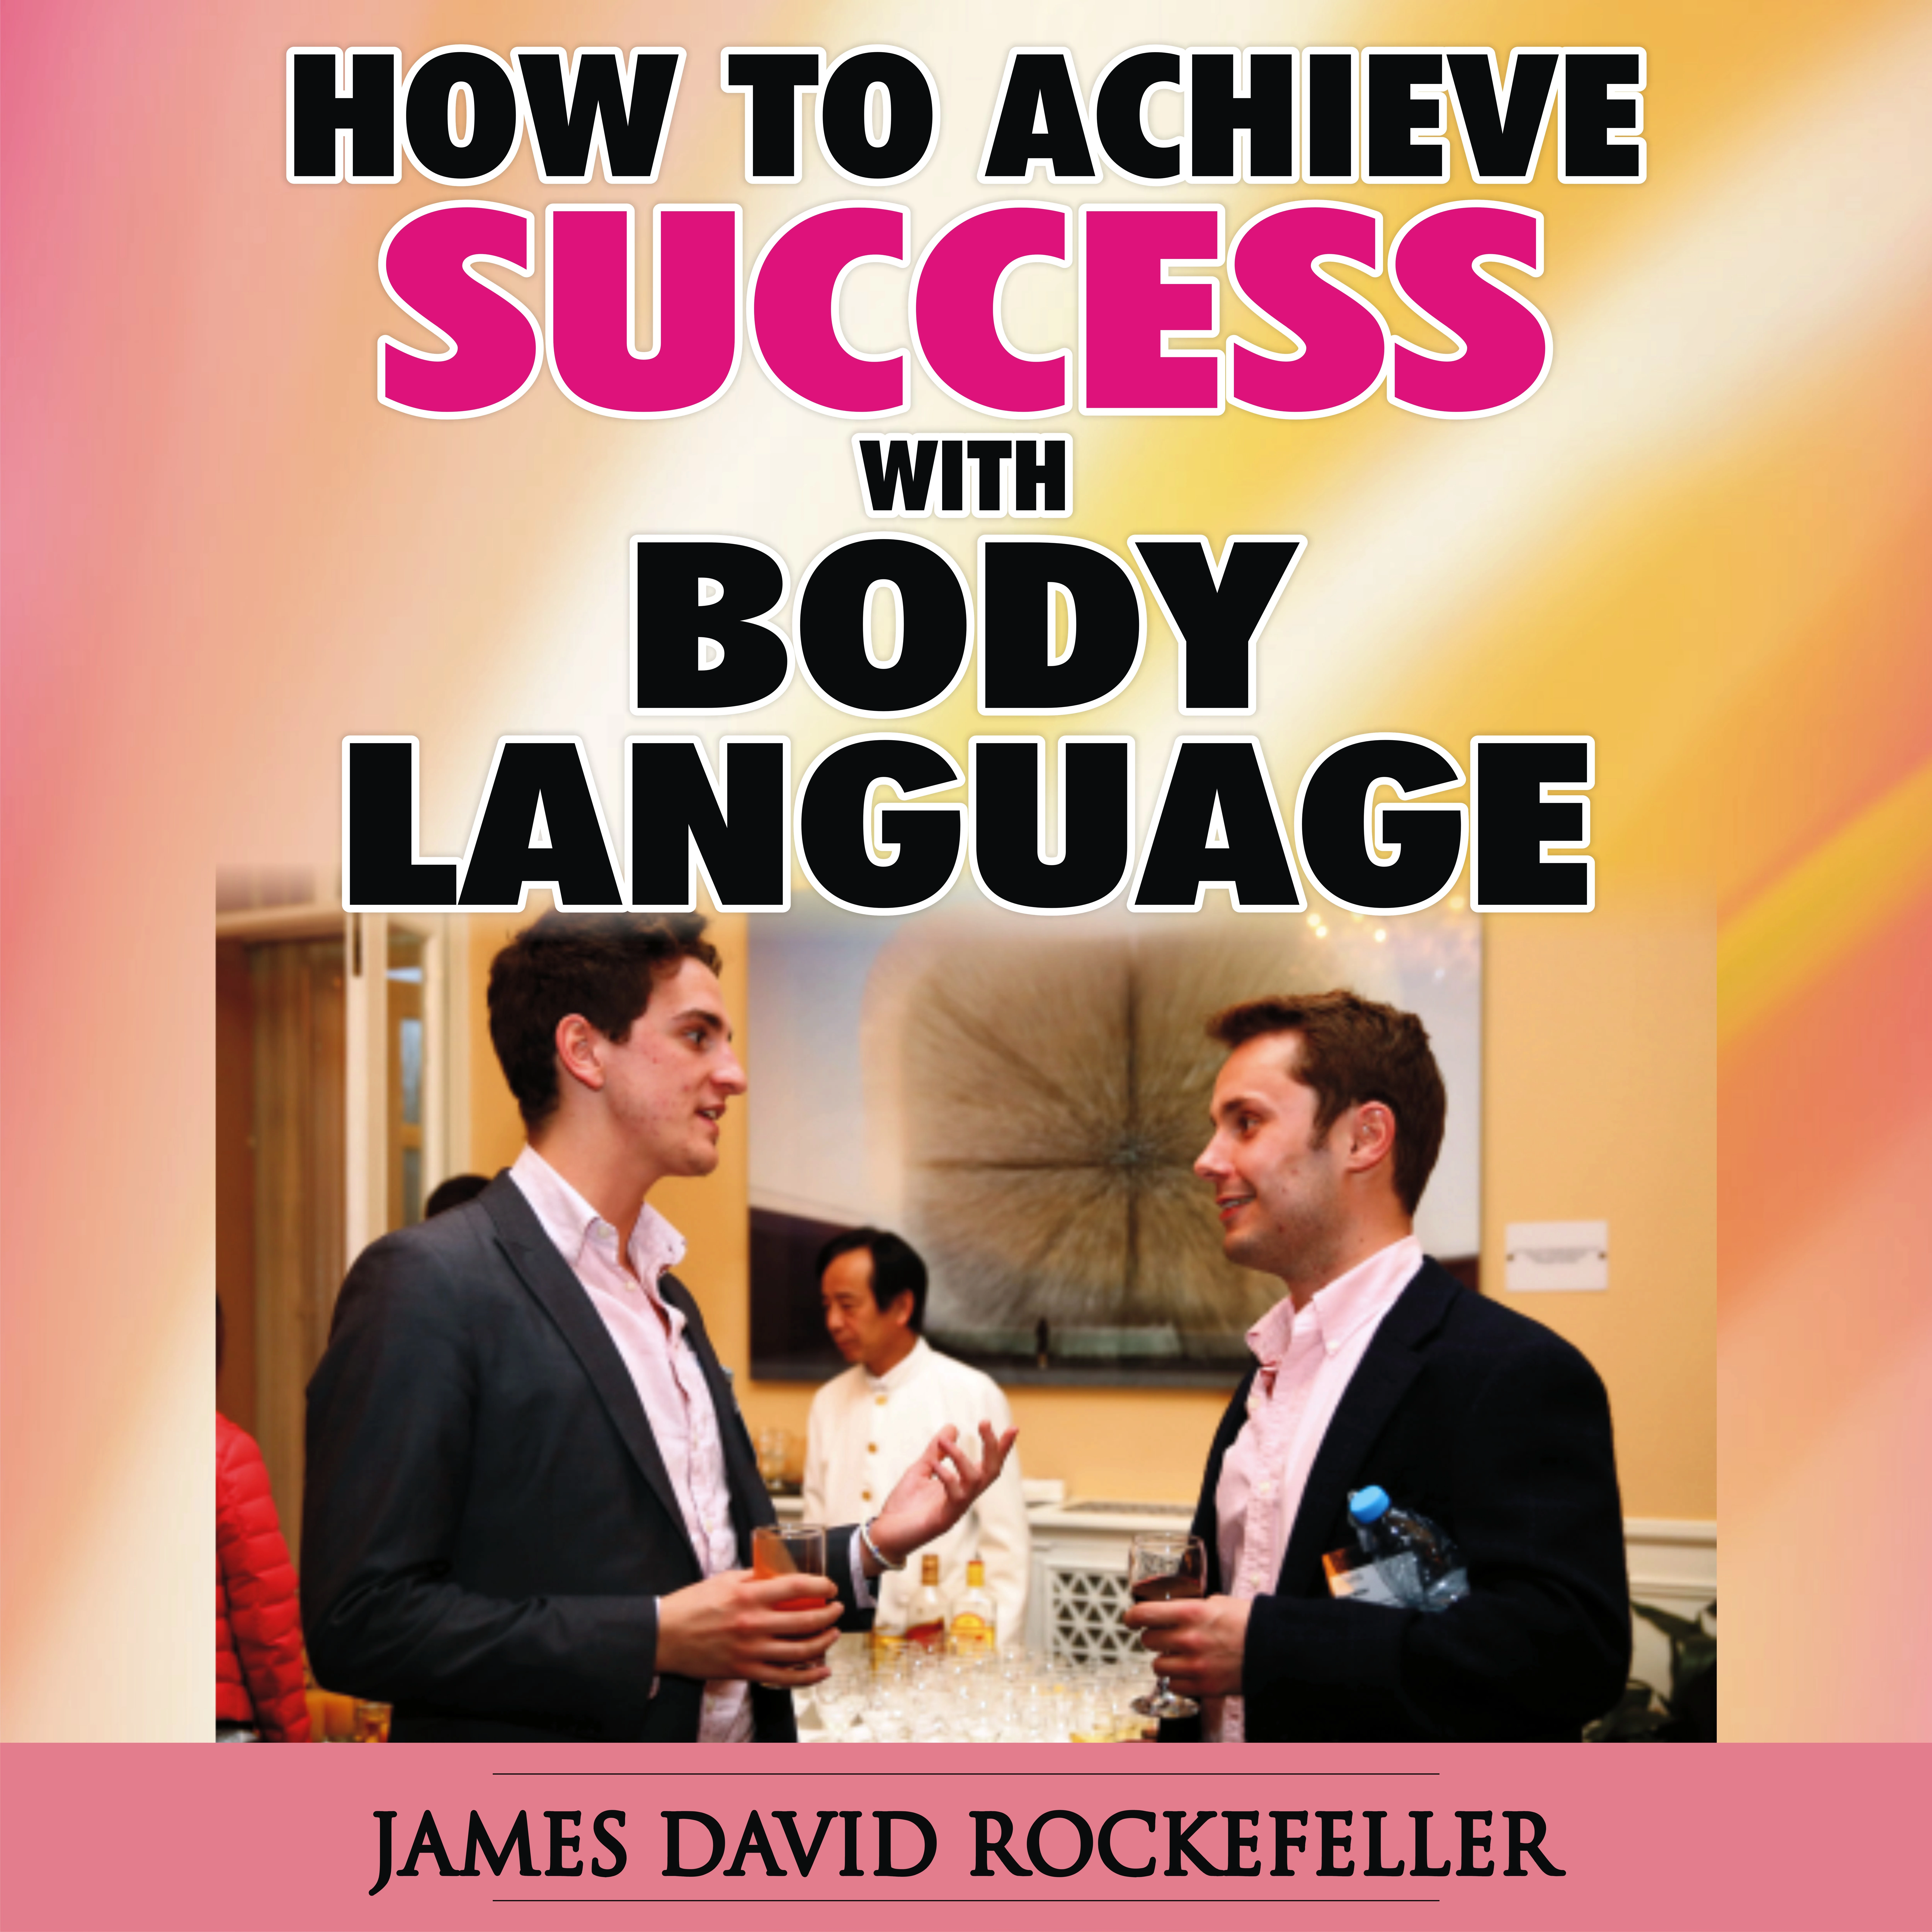 How to Achieve Success With Body Language Audiobook by James David Rockefeller